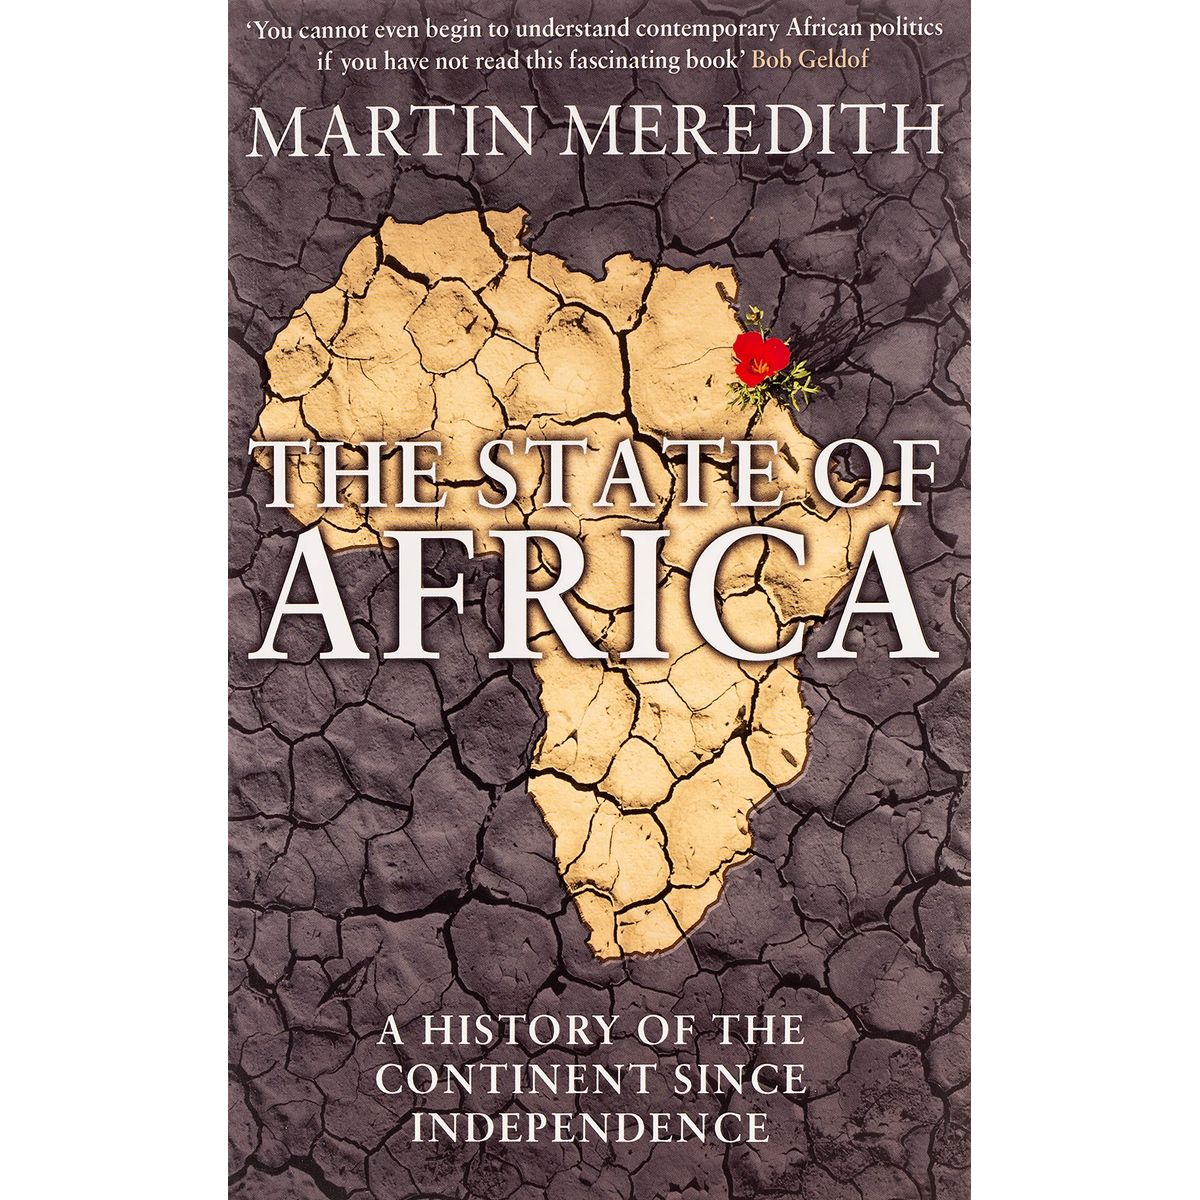 ISBN: 9780743232227 / 0743232224 - The State of Africa: A History of the Continent Since Independence by Martin Meredith [2006]